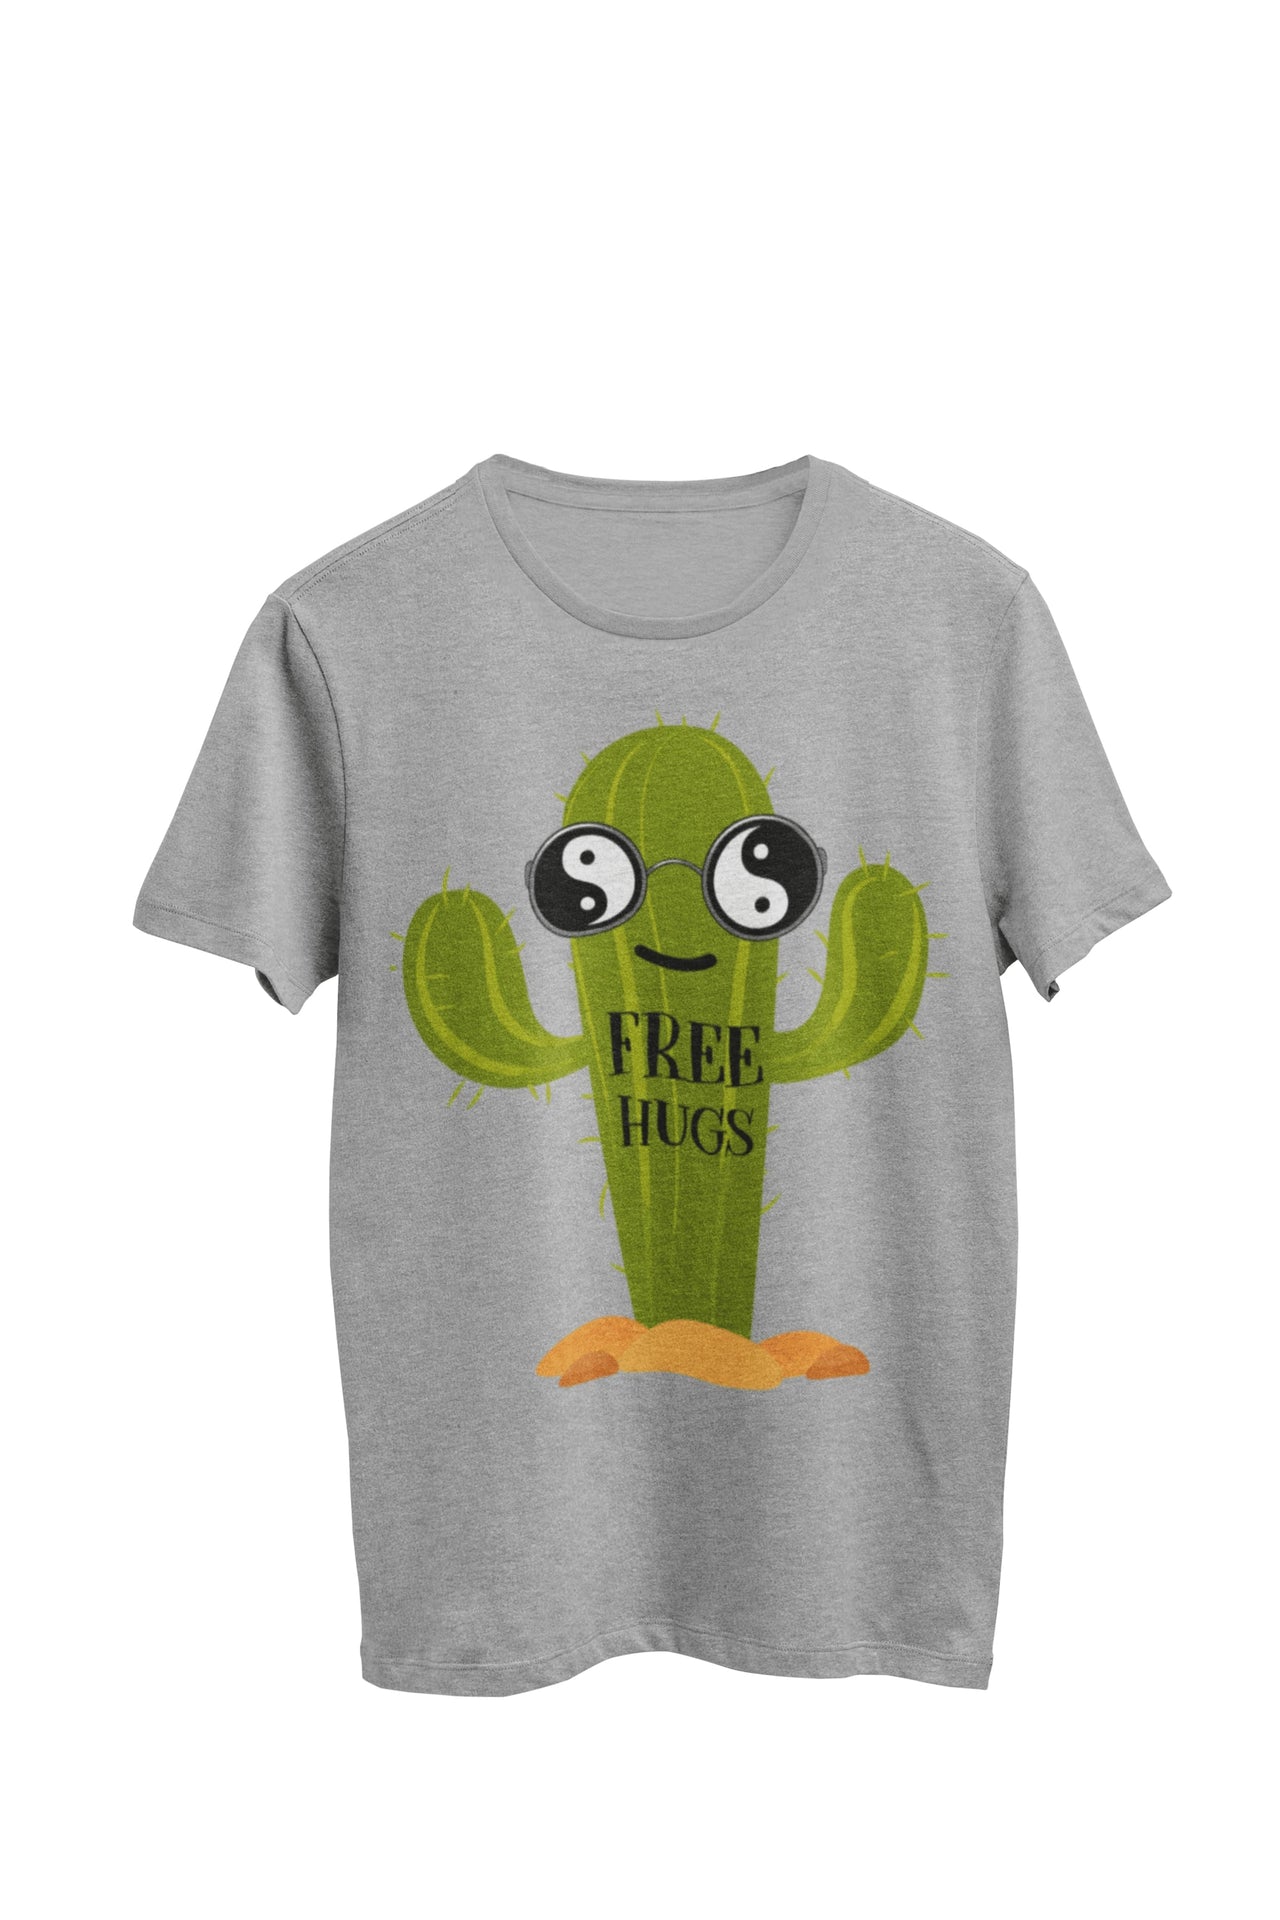 Gray heather unisex t-shirt featuring a fun-loving 'Free Hug' design, with a cactus wearing Yin Yang sunglasses to hug. Designed by WooHoo Apparel.